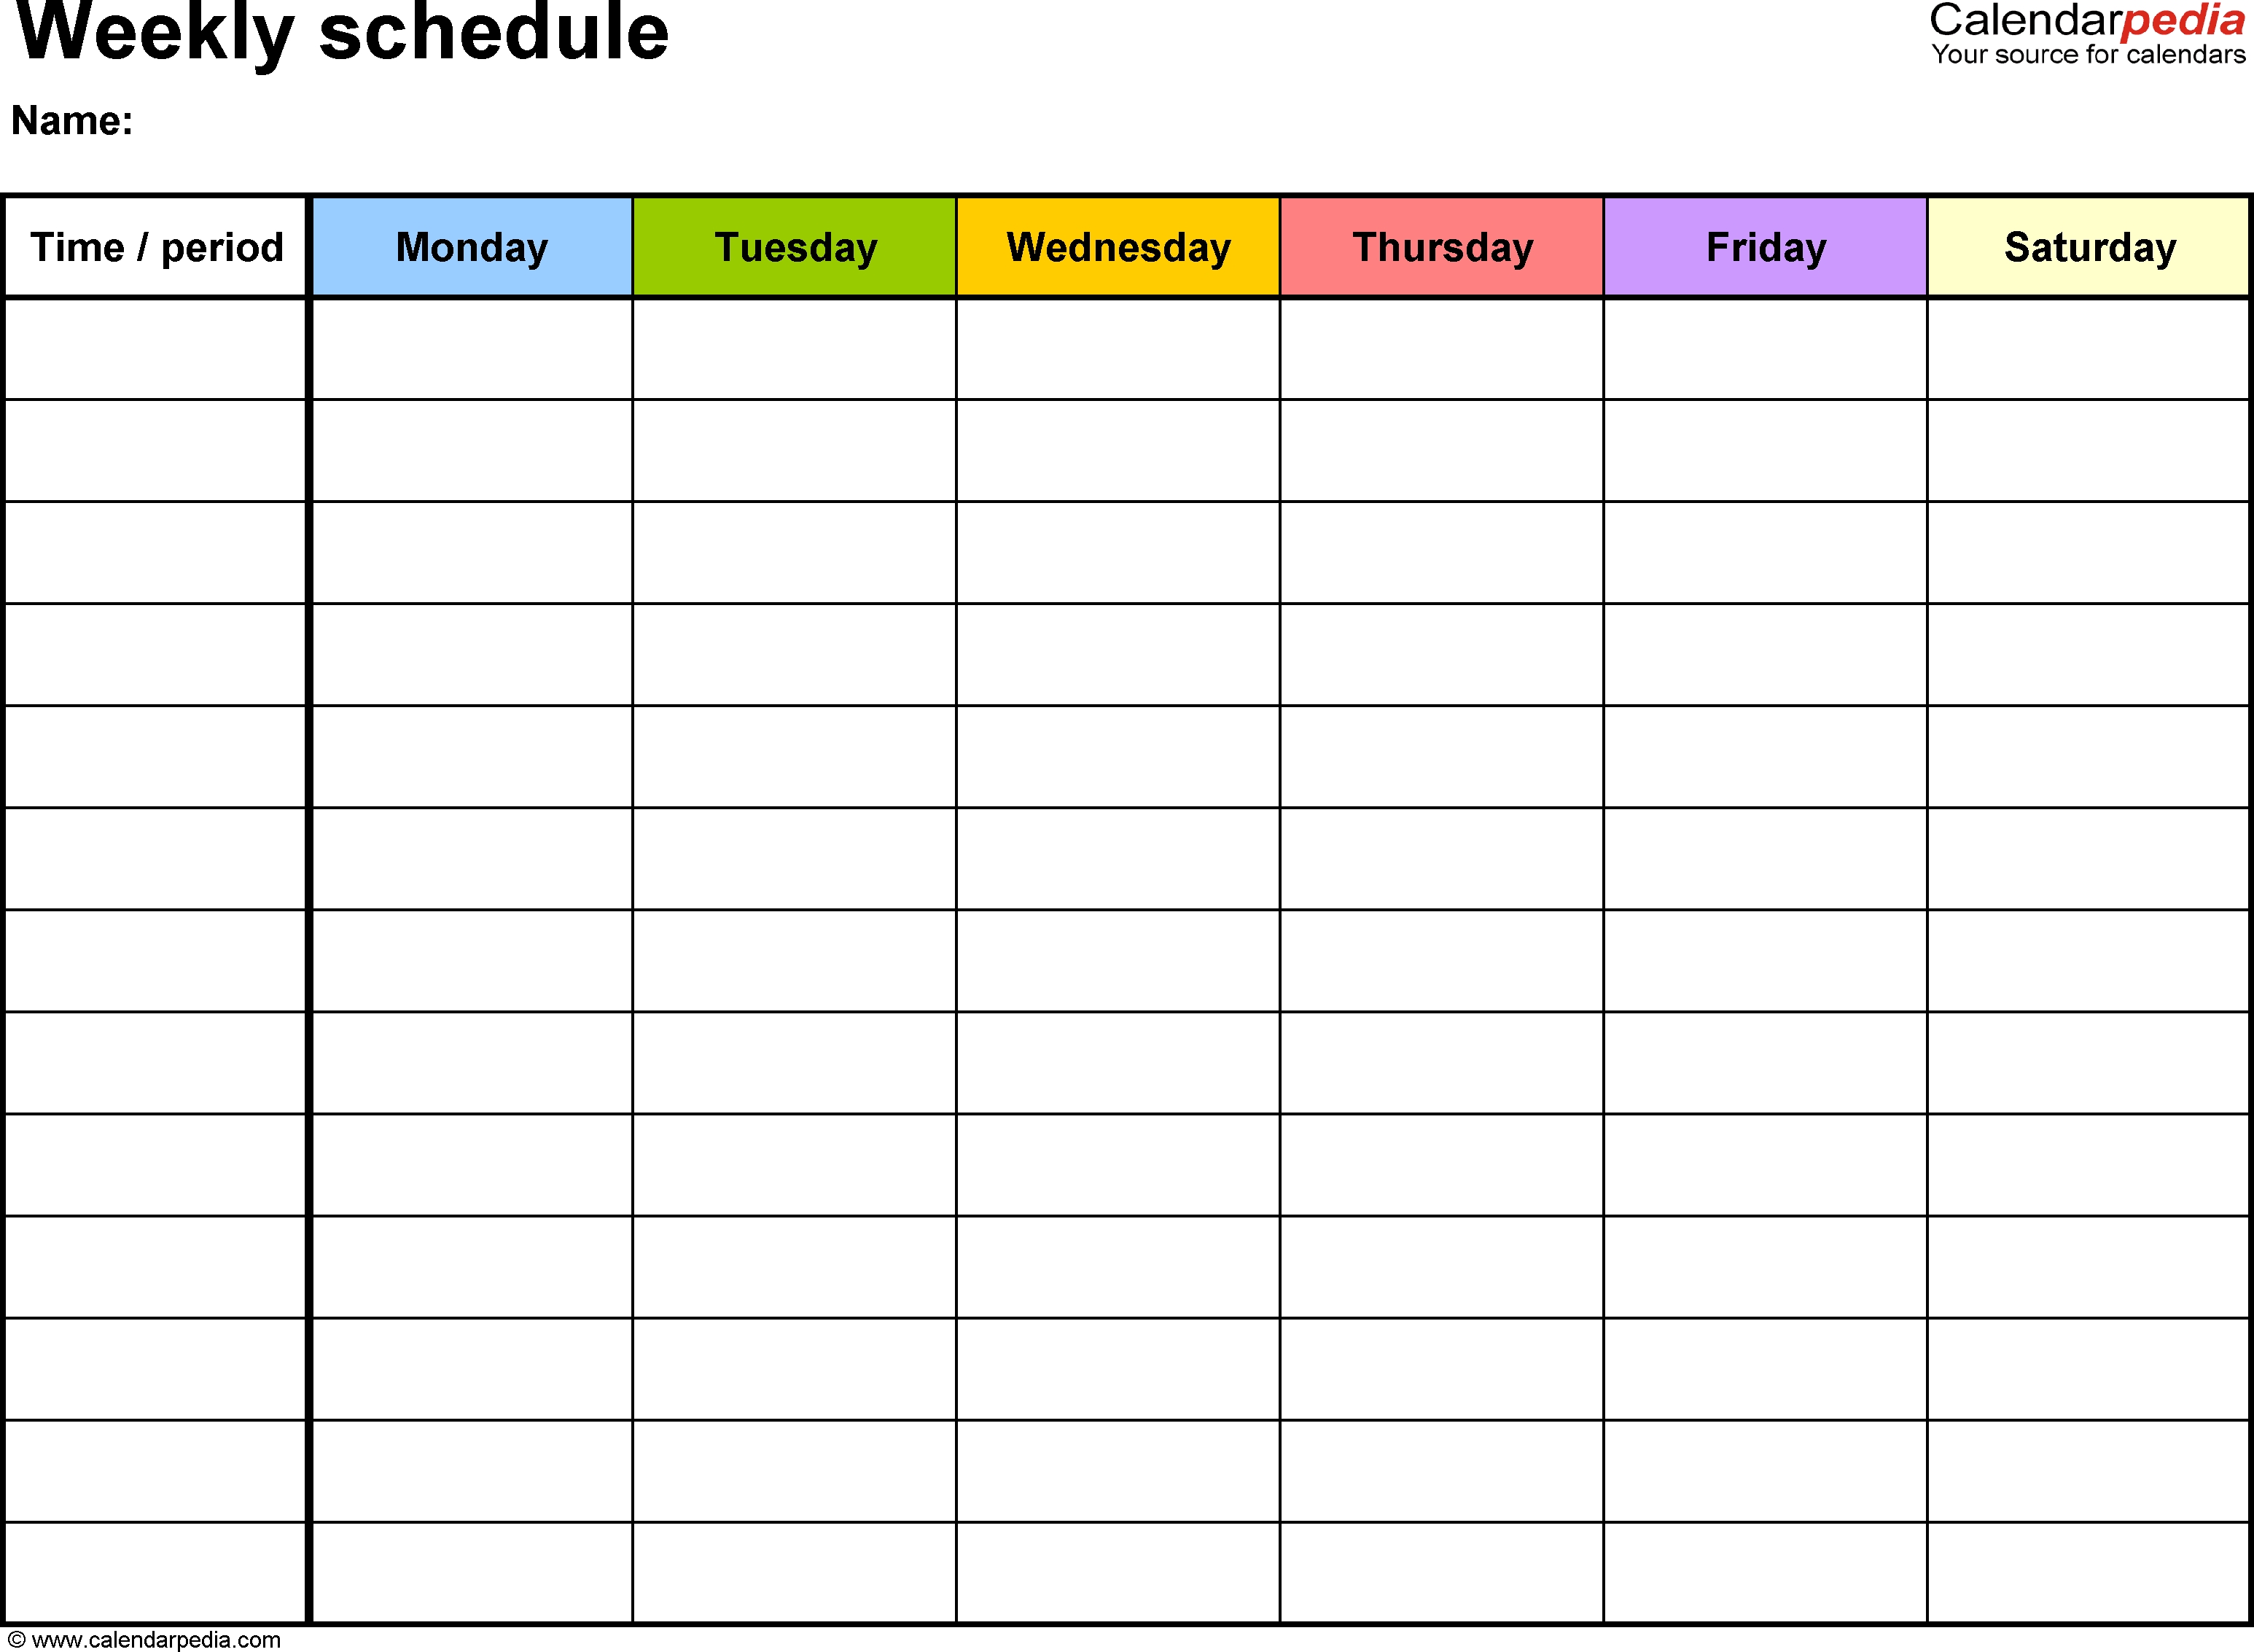 Free Weekly Schedule Templates For Word - 18 Templates with regard to Printable Weekly Calendar Monday Through Friday